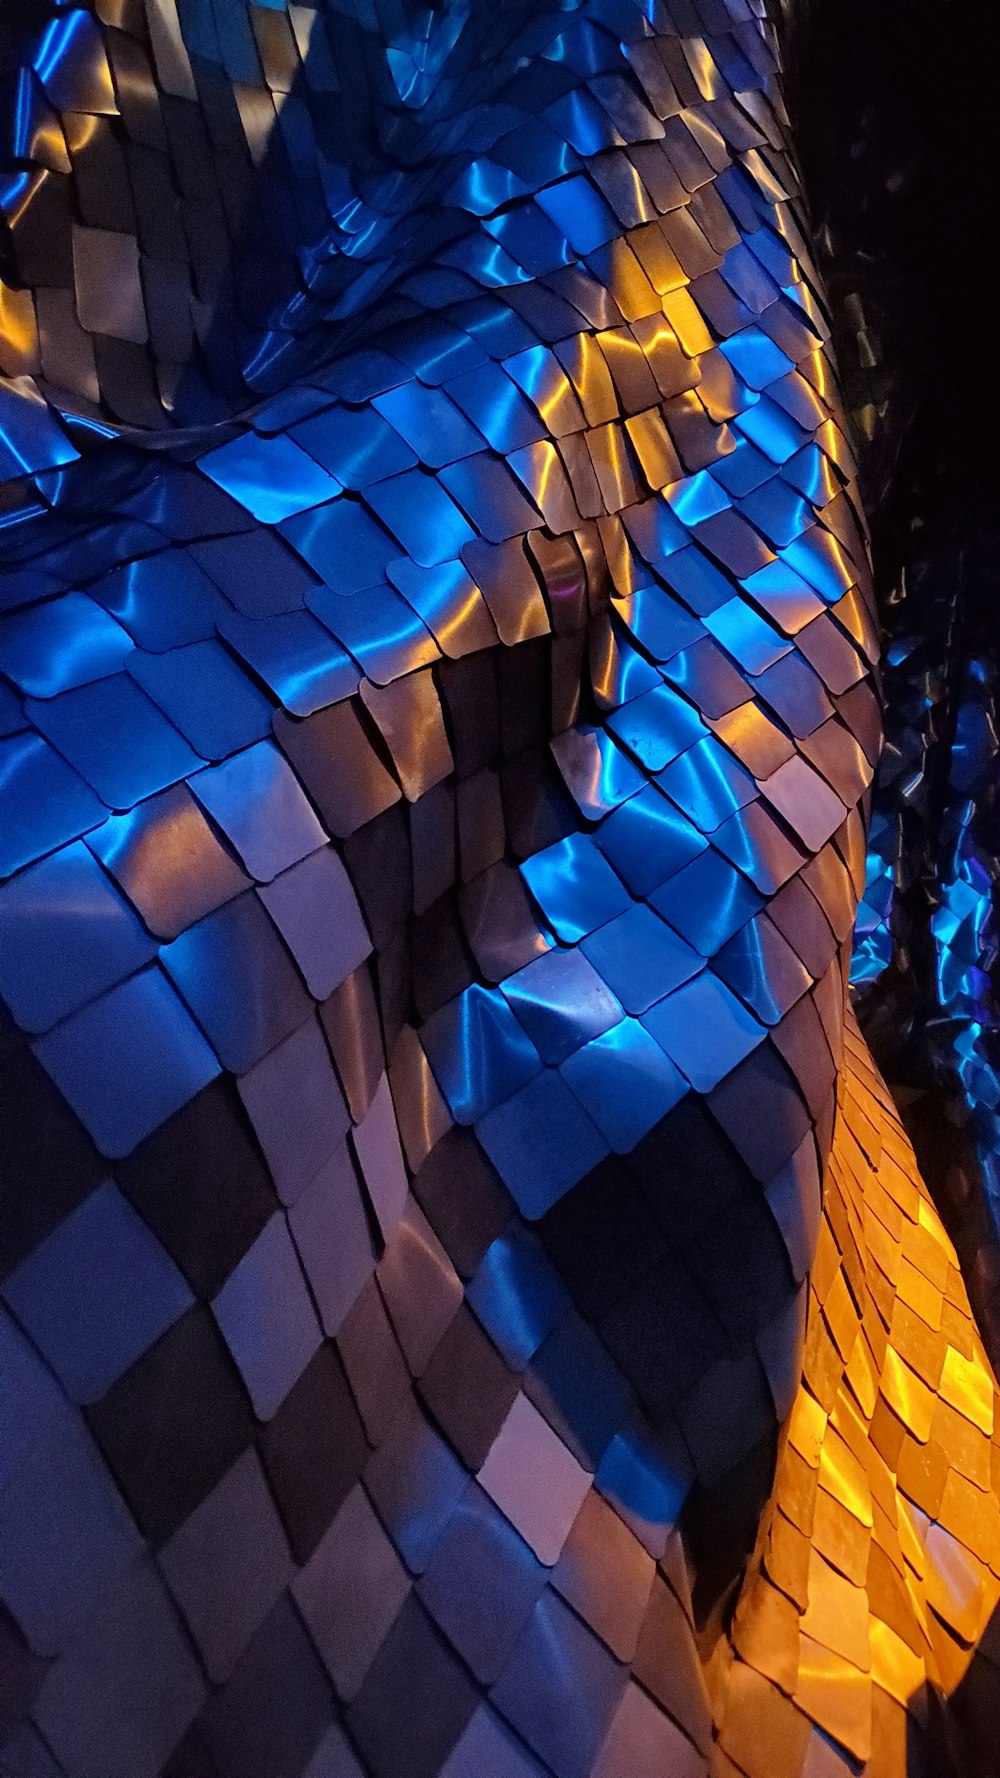 a close up of a shiny surface with blue and yellow lights